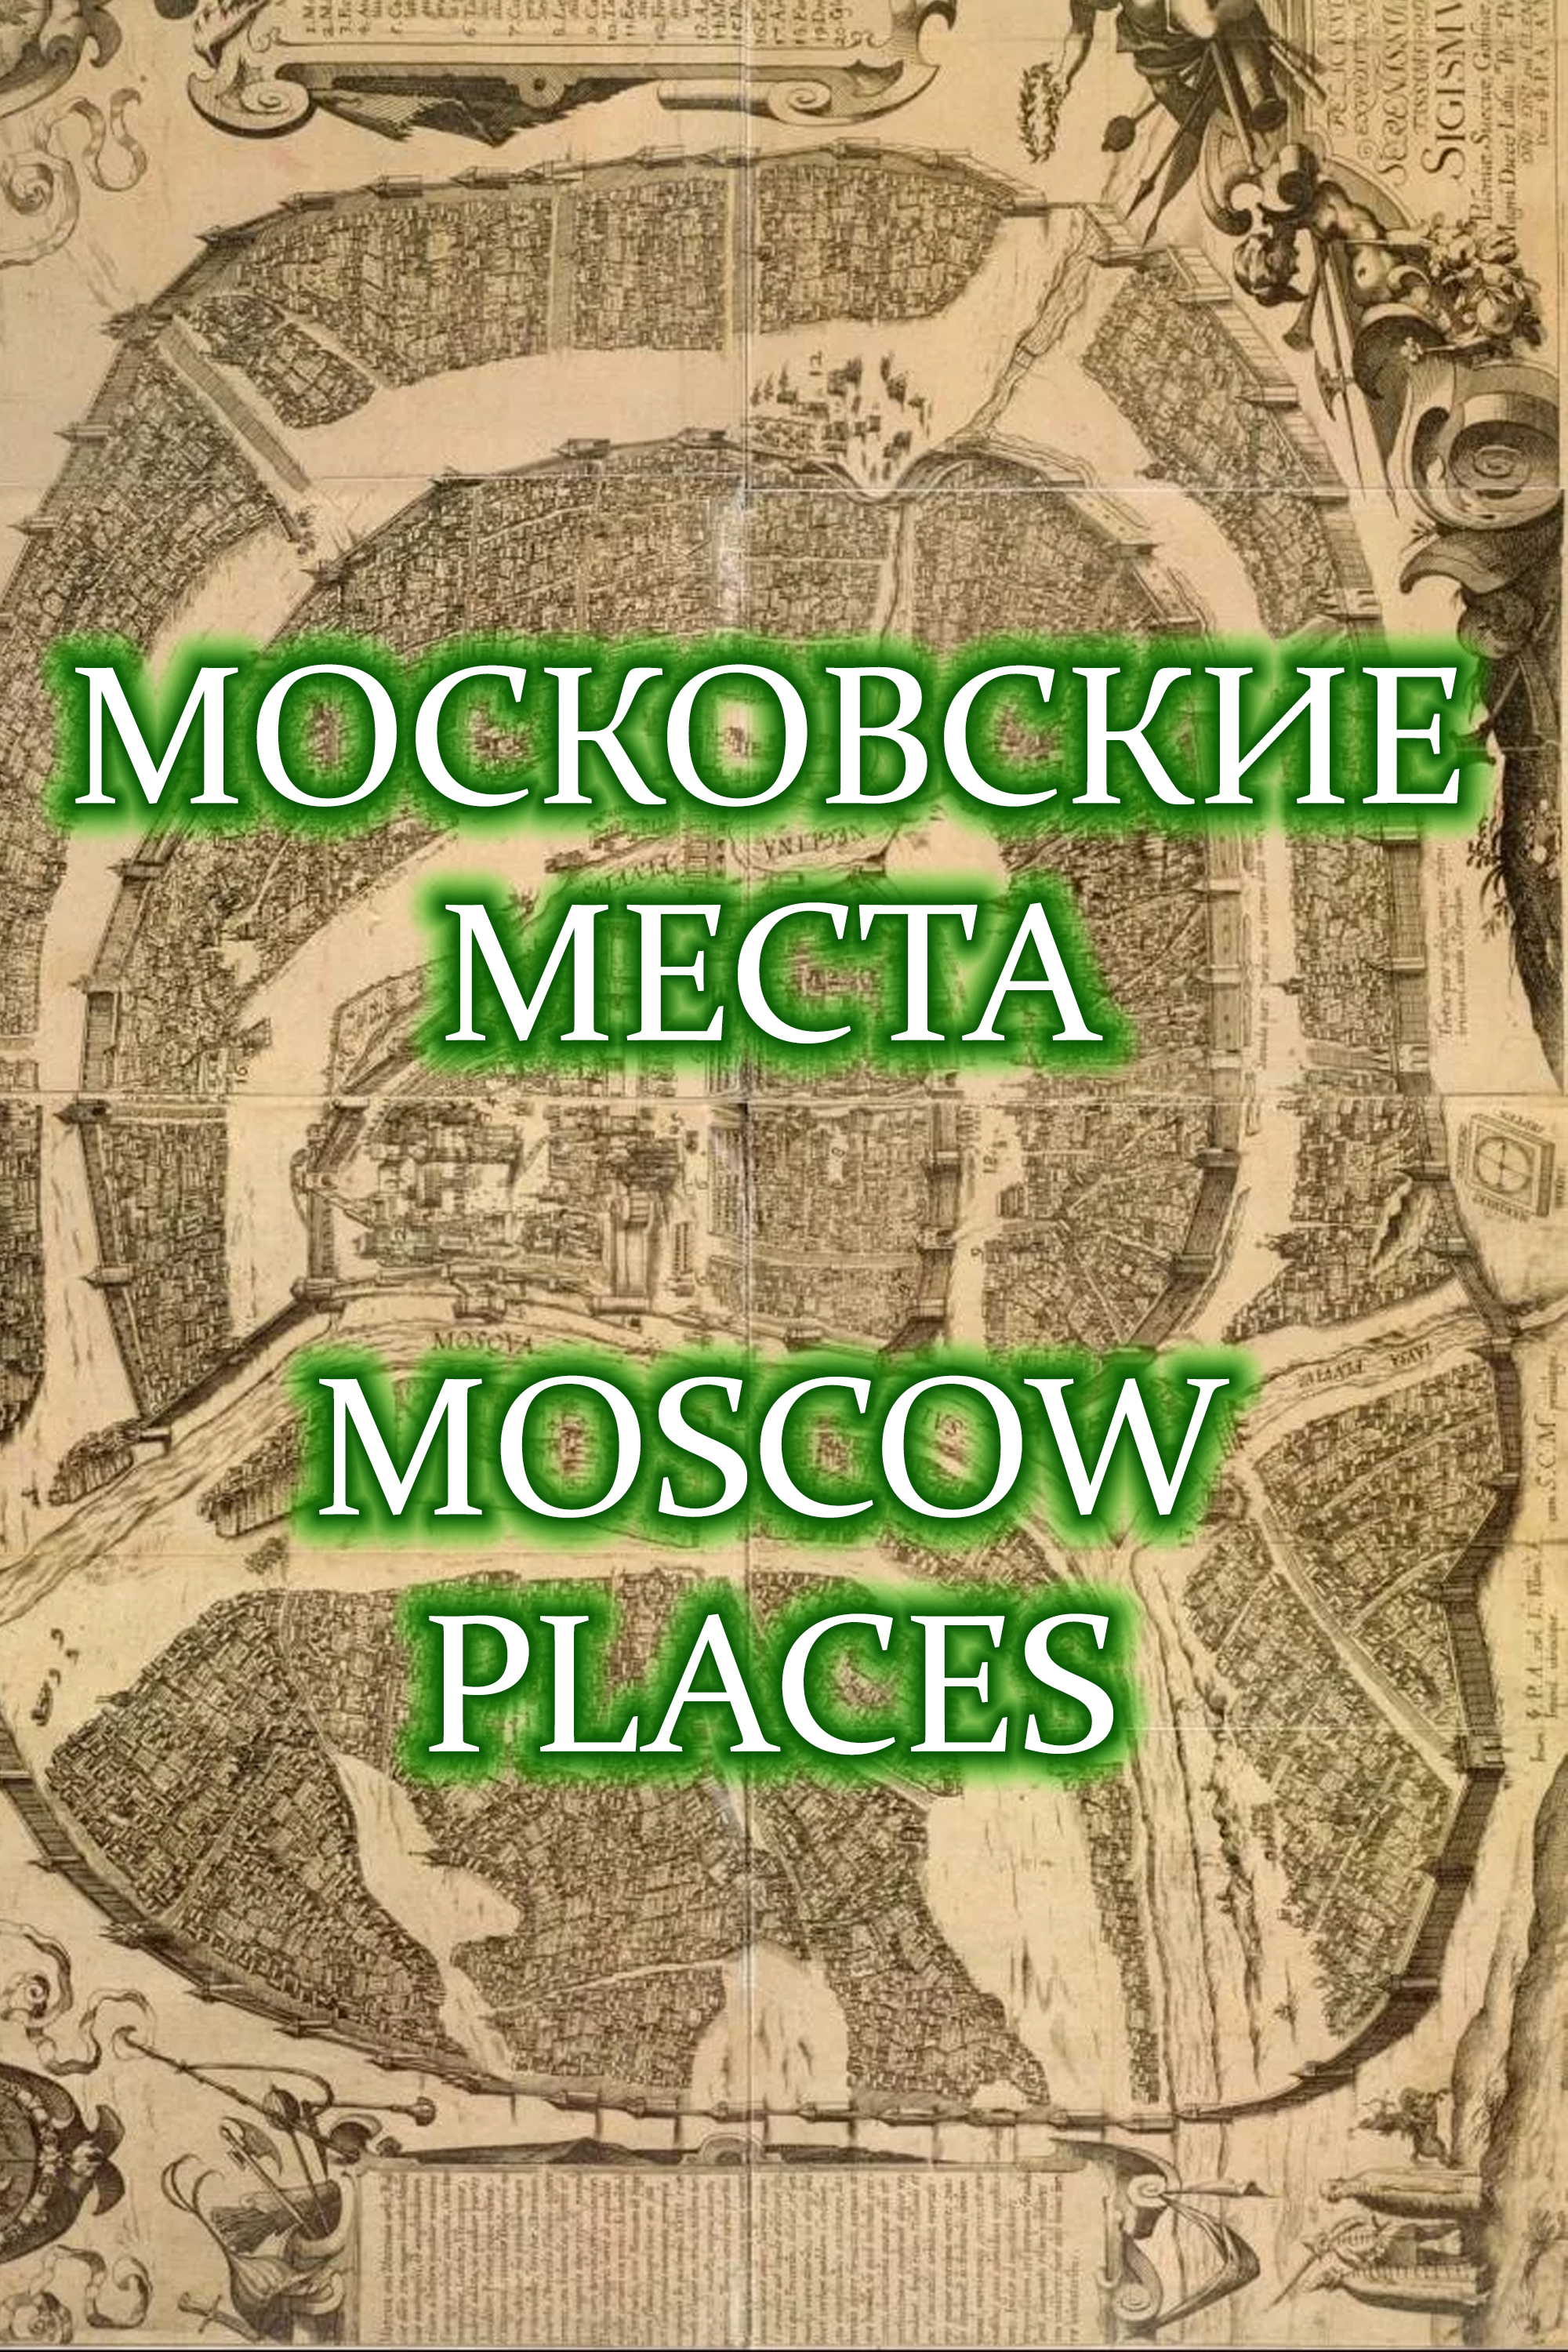 Moscow places